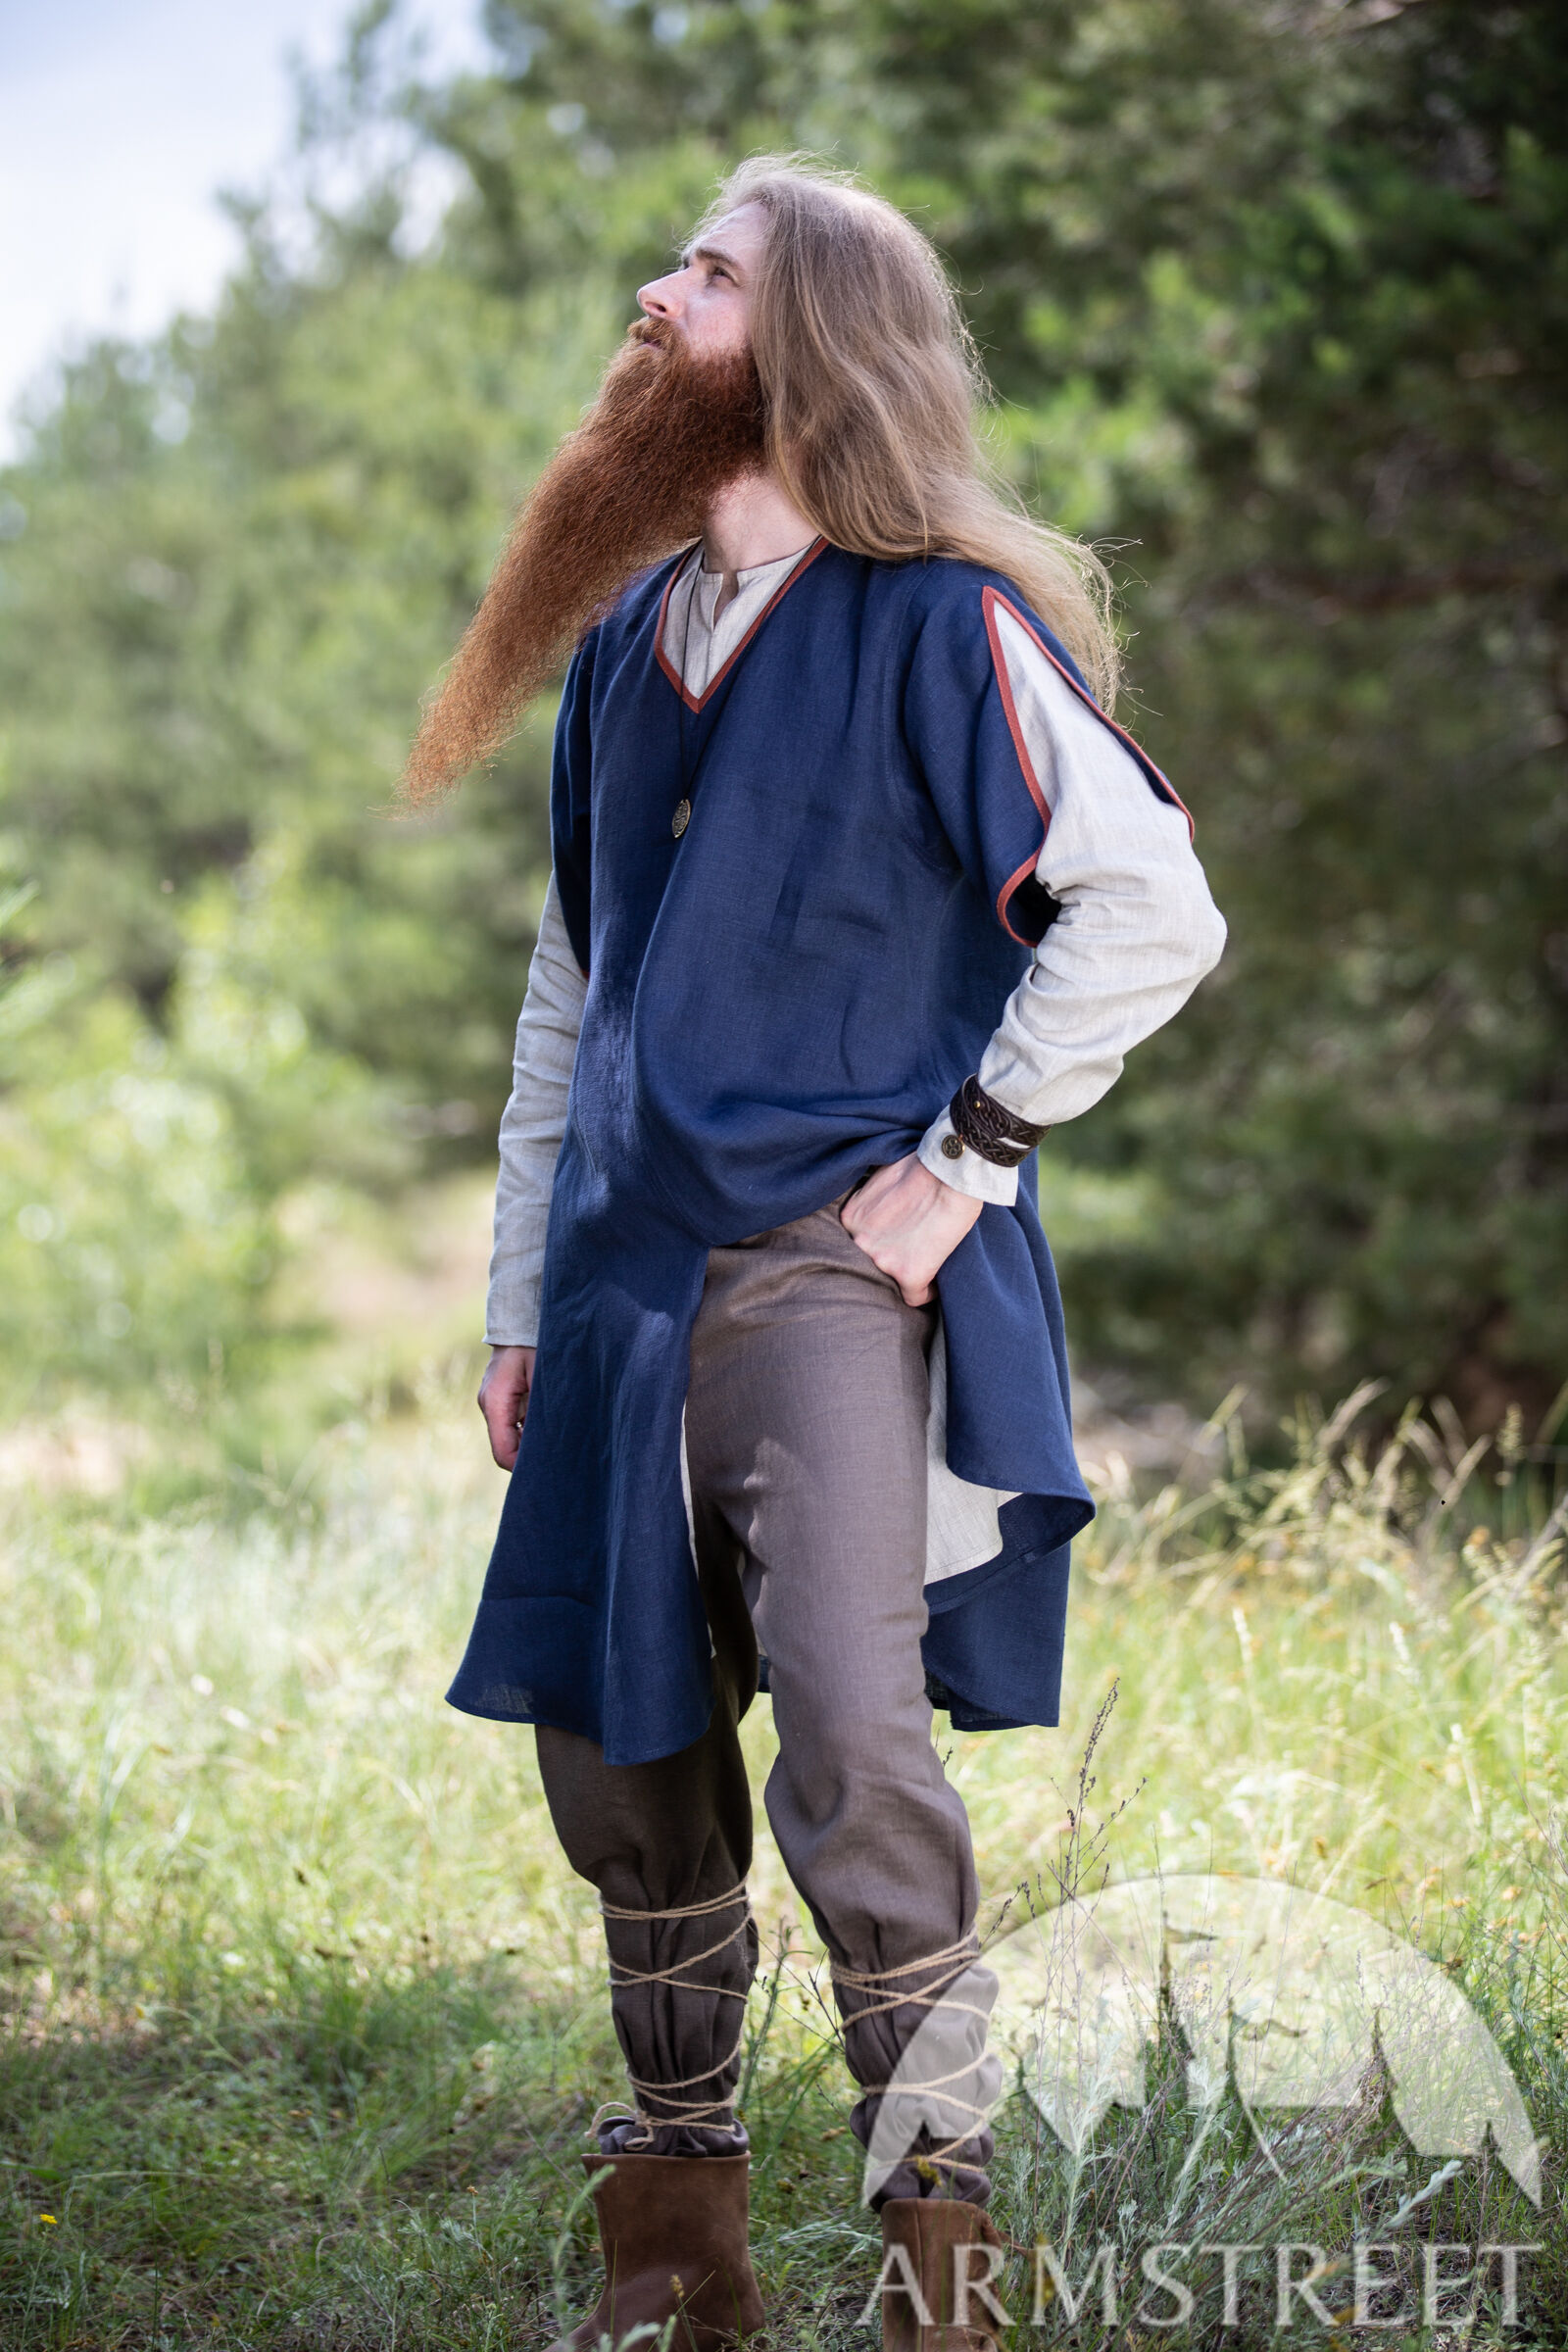 https://armstreet.com/catalogue/full/ulf-the-watcher-set-undertunic-and-short-sleeved-overtunic-with-accents.jpg